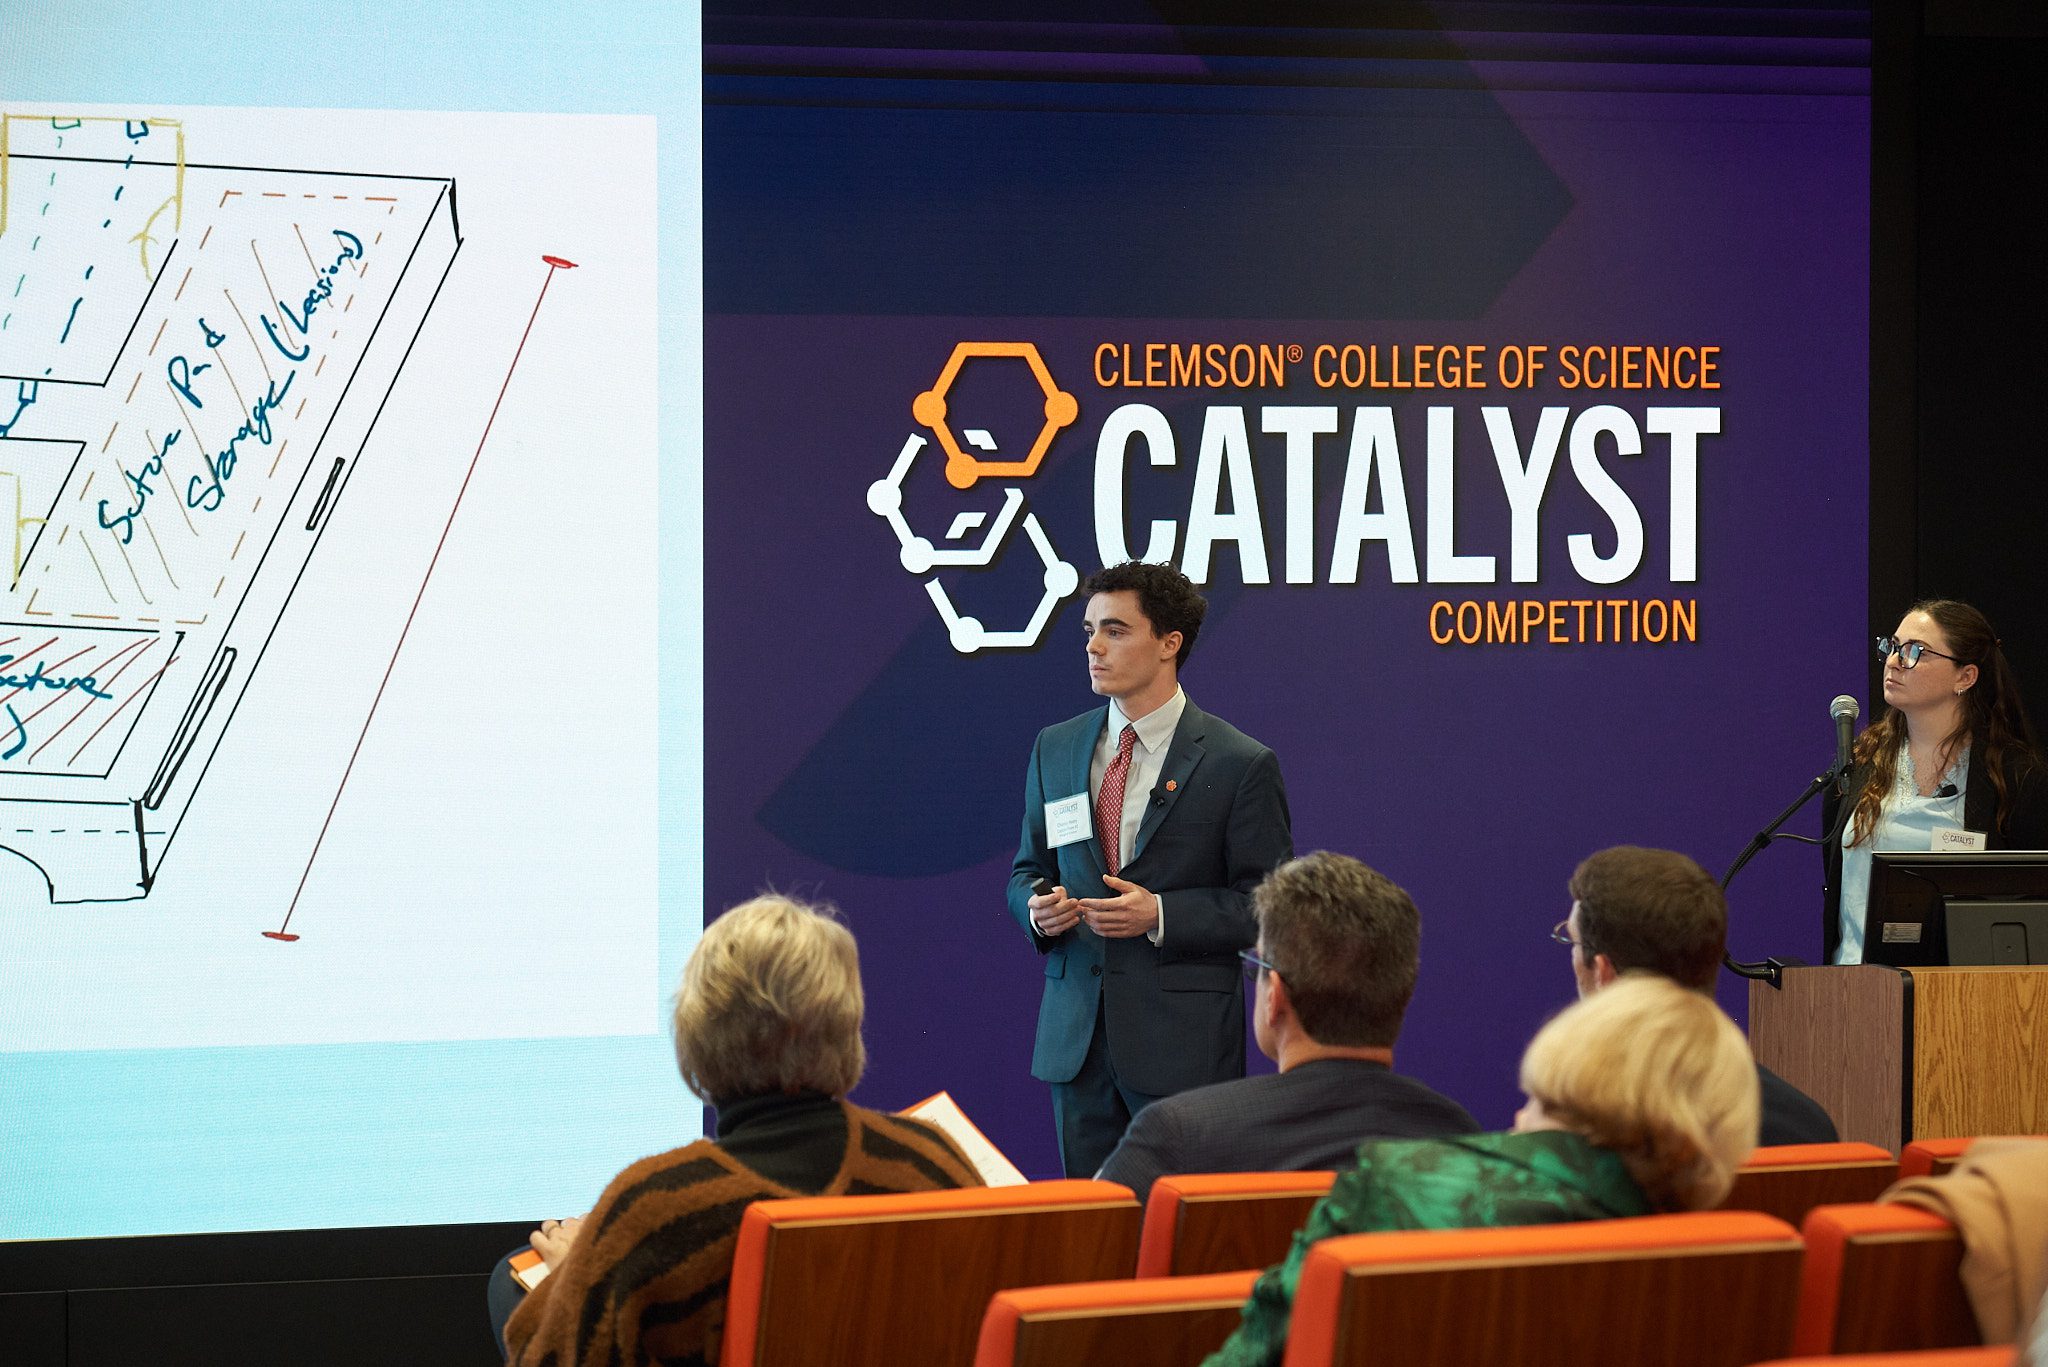 a man in a suit presents during the College of Science's Catalyst Competition.